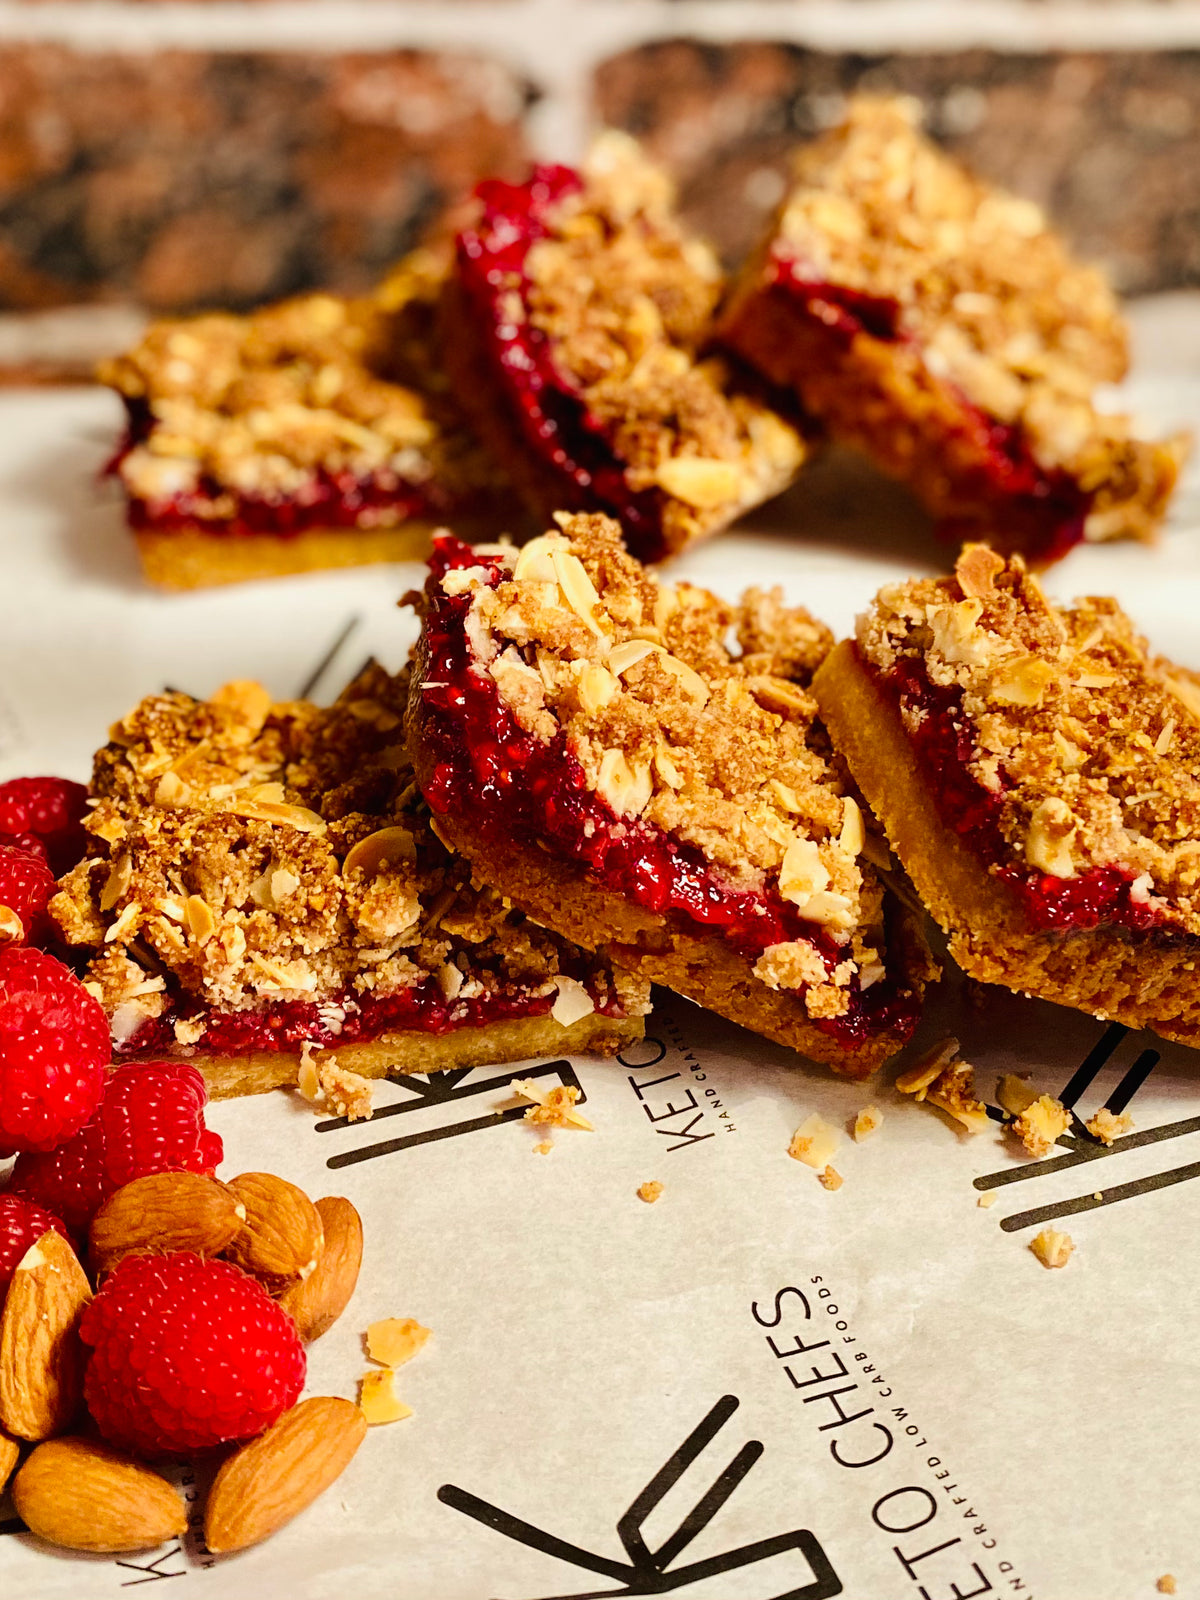 Raspberry Compote with Cinnamon & flaked Almond Crumble Tray Bake 6 /8 PORTIONS (FREEZER FRIENDLY) 500g